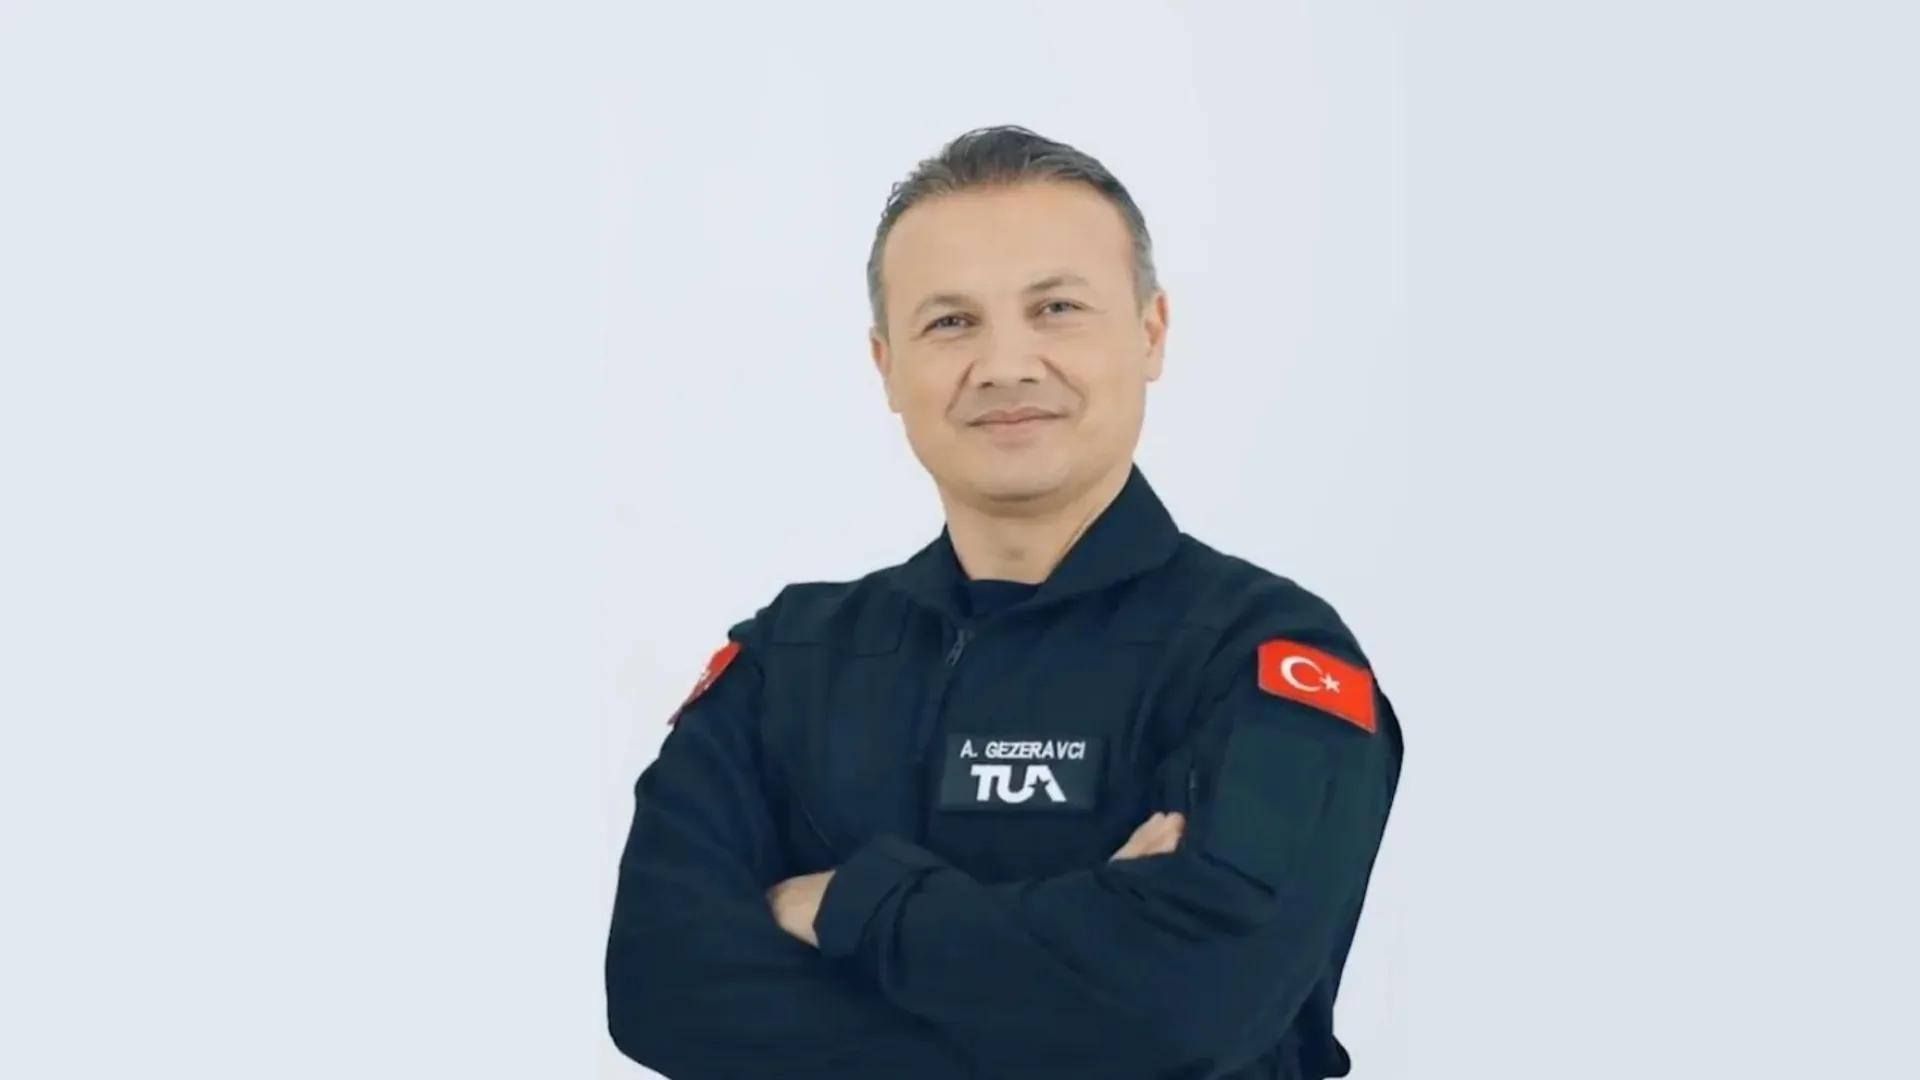 First Turkish astronaut to go into space soon